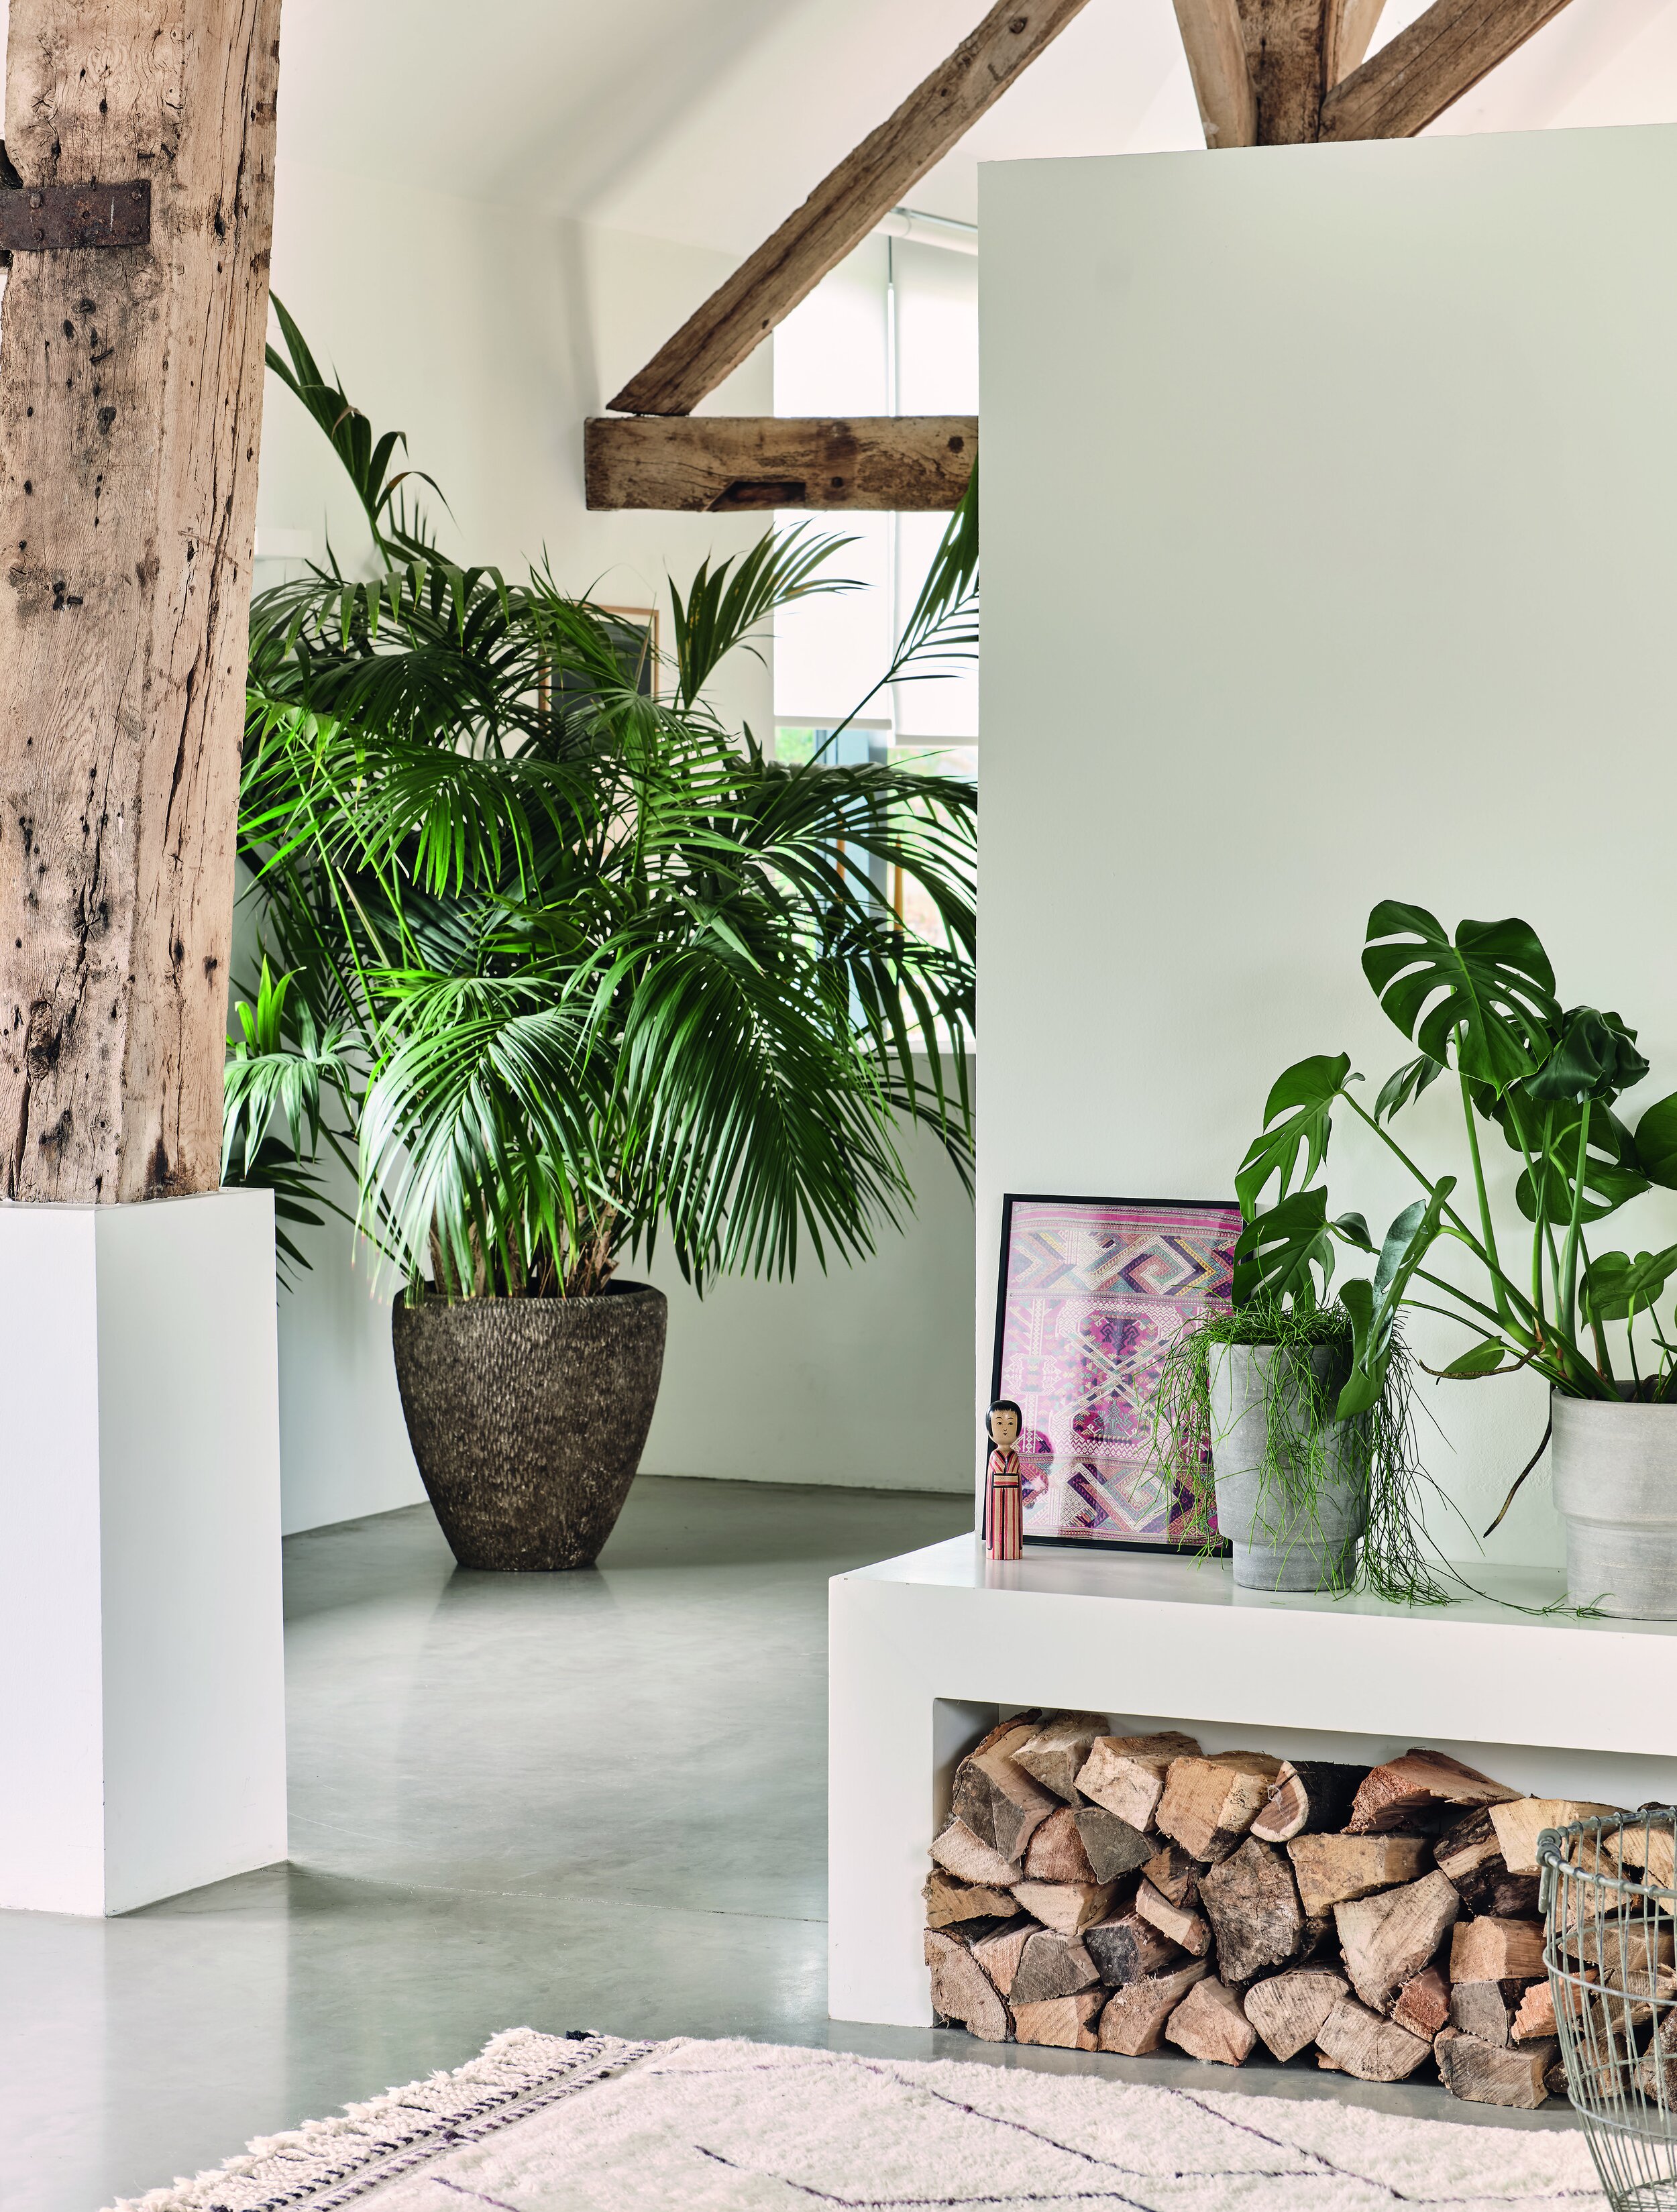 a bright interior space with wooden beams and plants